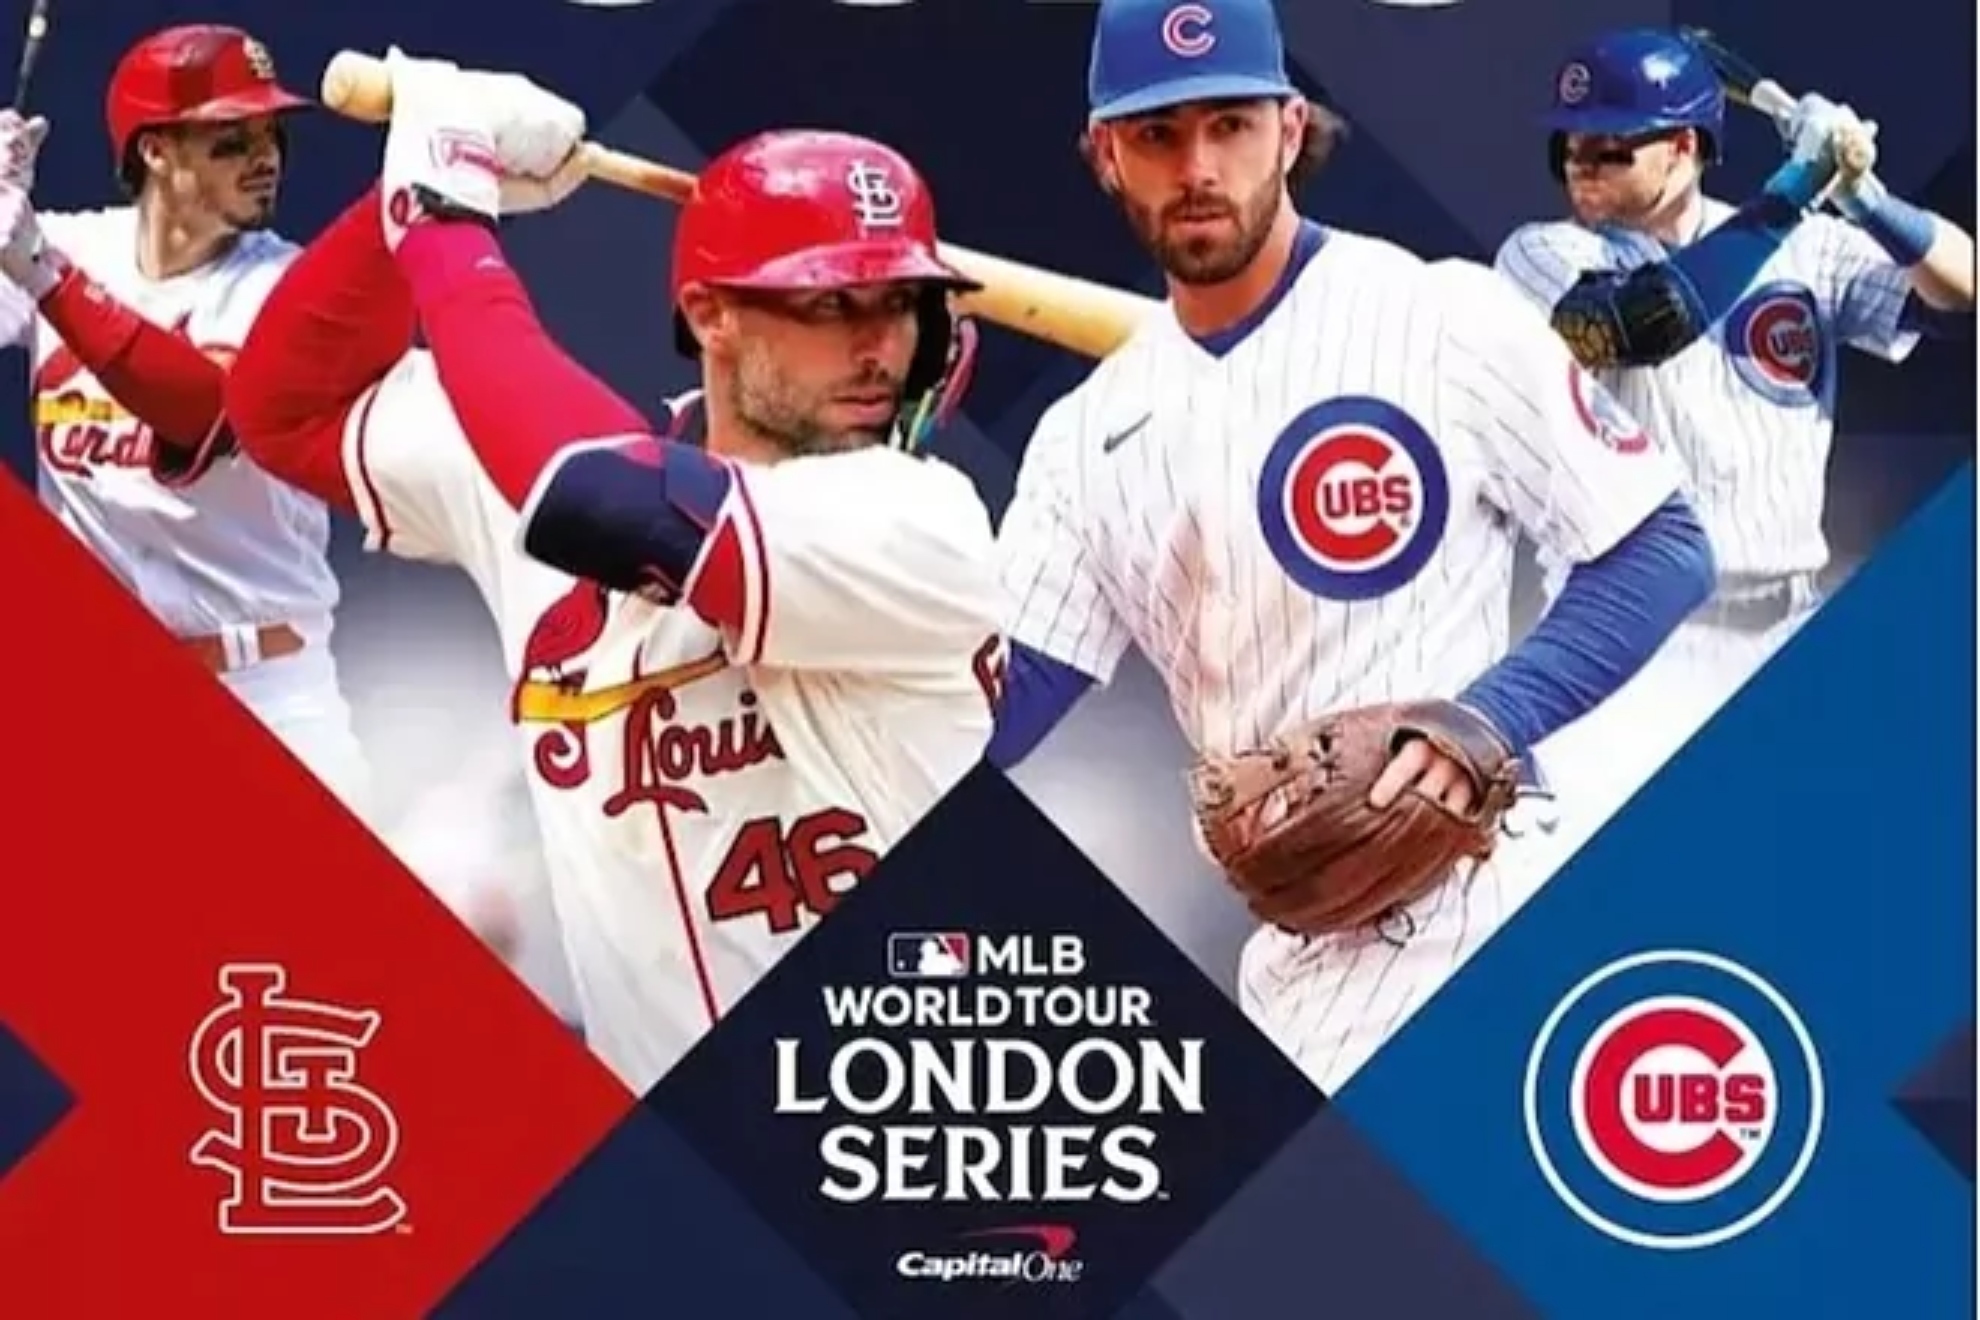 MLB in London: Steele, Happ shine in Cubs' 9-1 win over Cardinals on their first game in Europe